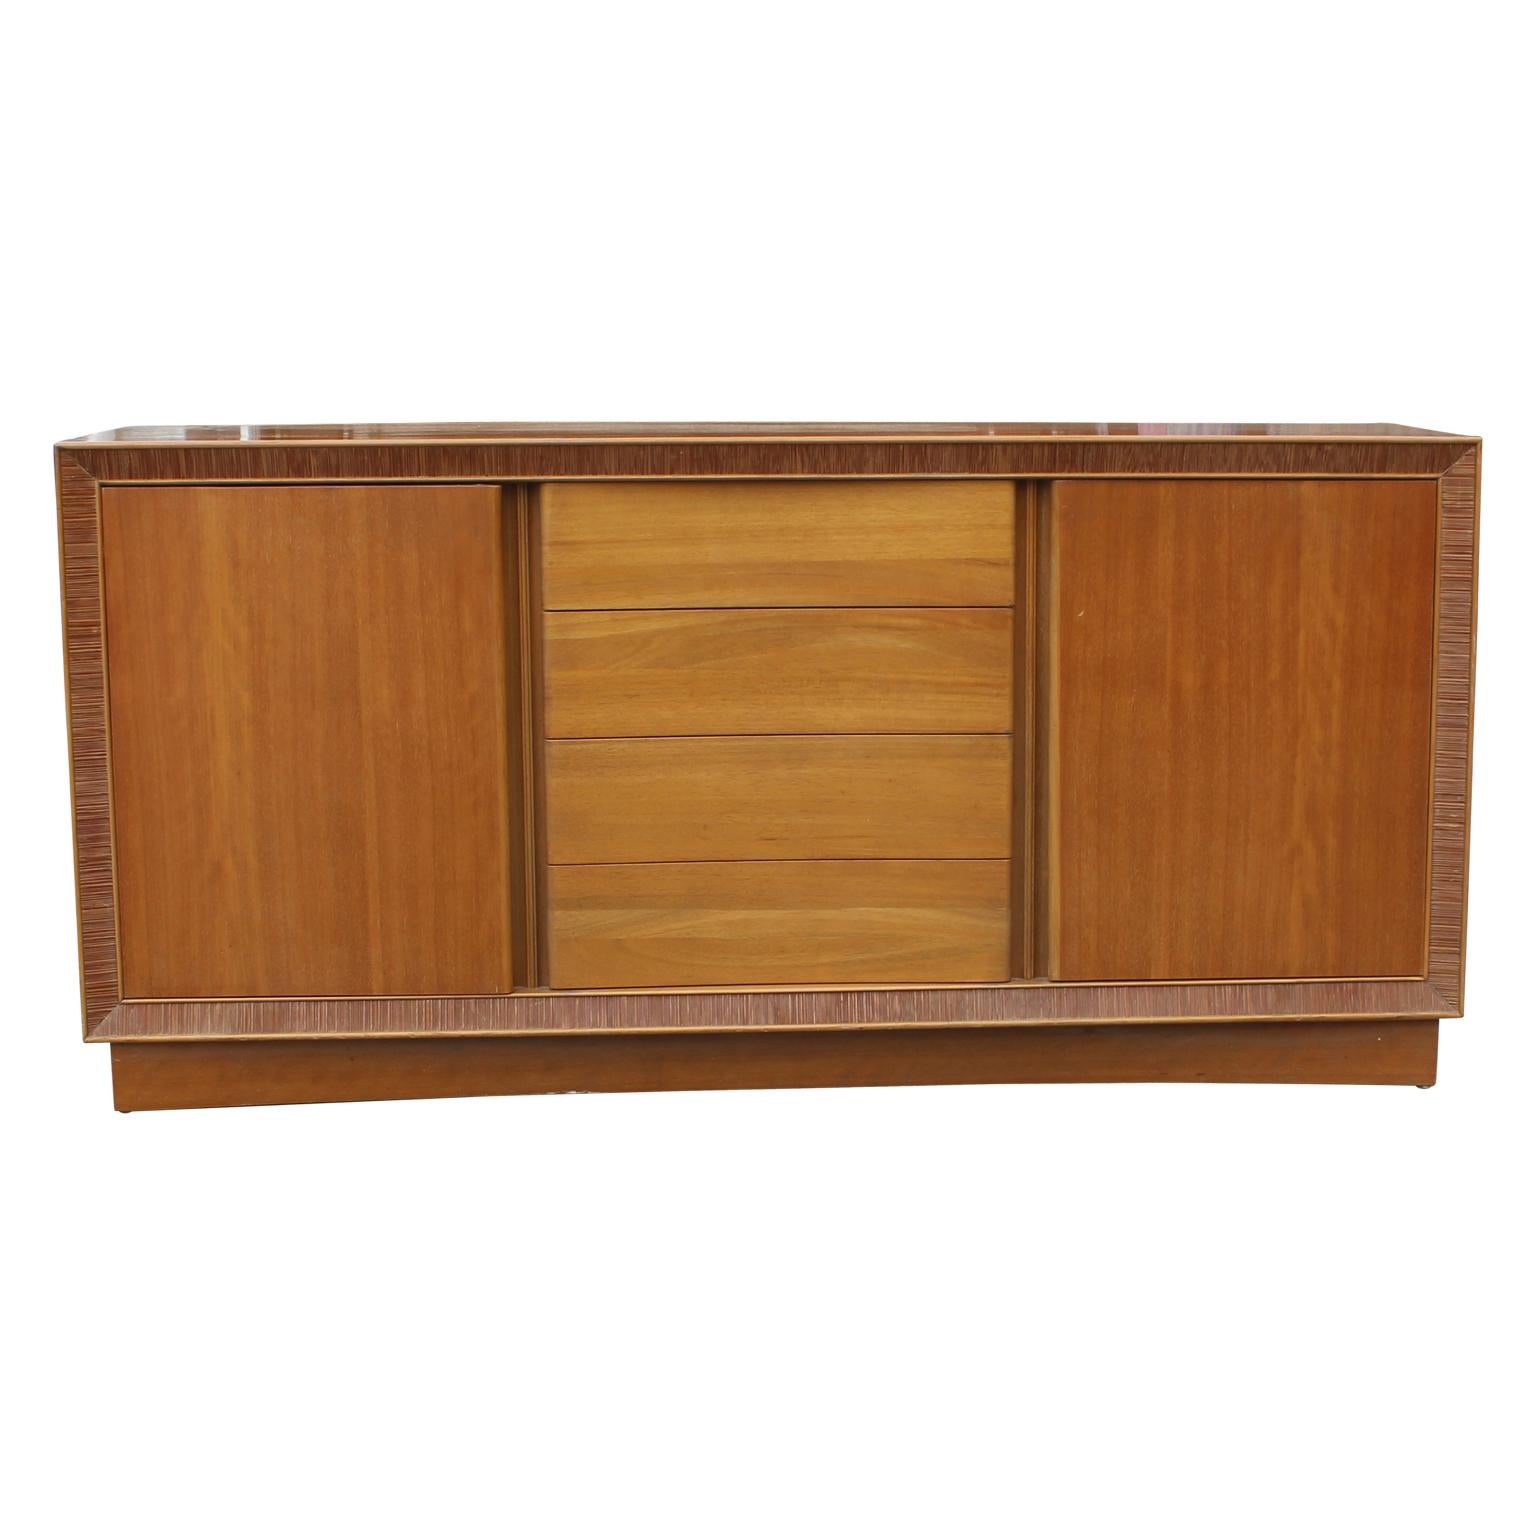 Beautiful sideboard by Paul Frankl for Brown & Saltman. It has a ribbed wood detailed boarder. The middle section has three drawers and the sides have doors in front of shelving. In great vintage condition.